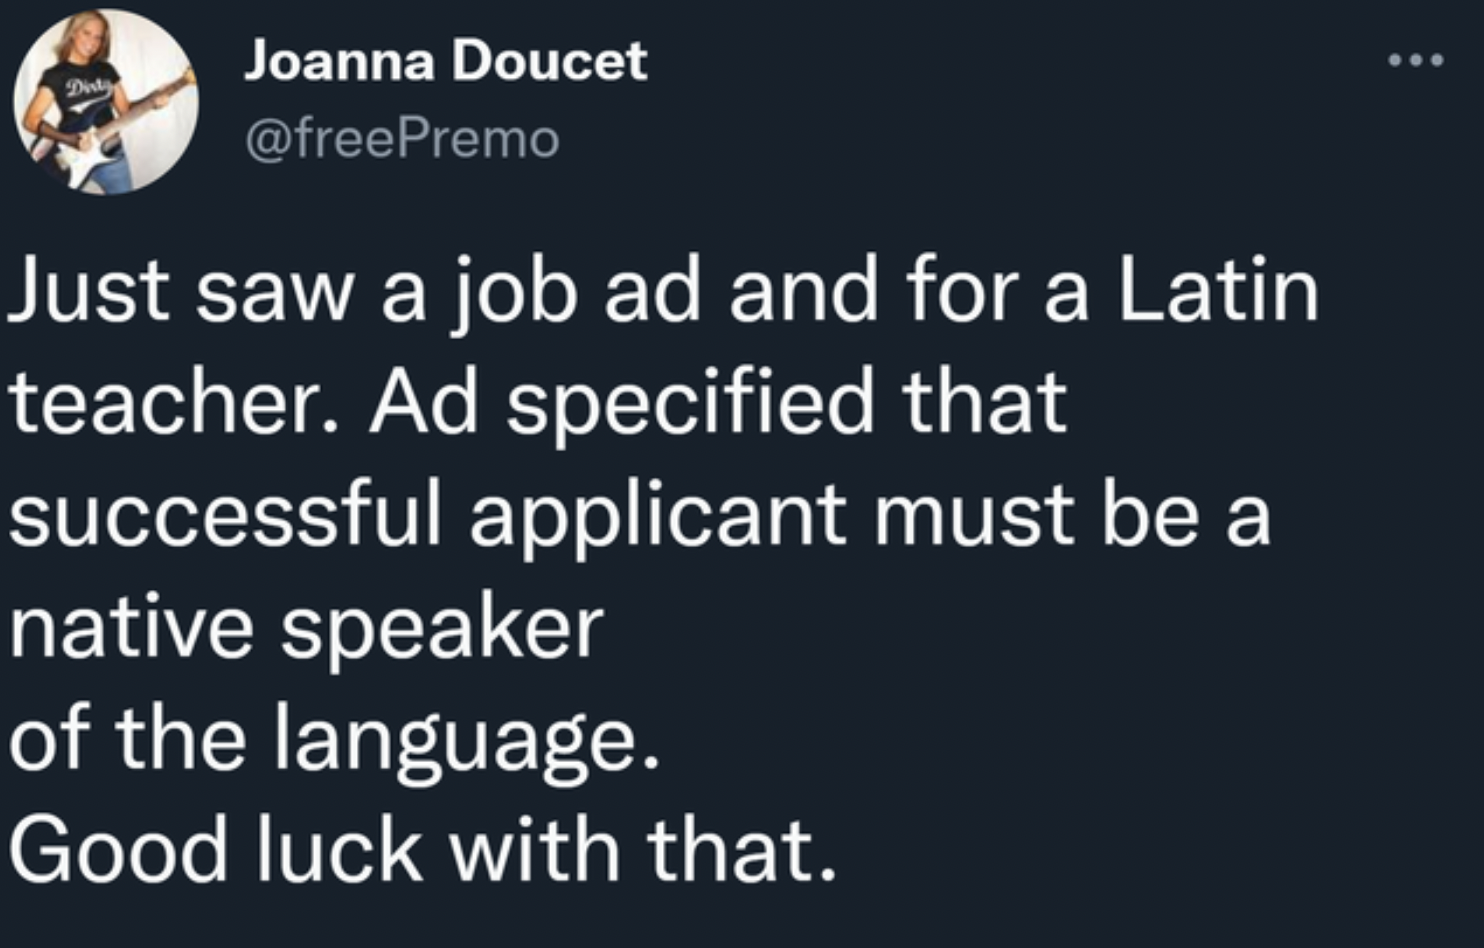 Funny Facepalms - cdc touching hands meme - Just saw a job ad and for a Latin teacher. Ad specified that successful applicant must be a native speaker of the language. Good luck with that.